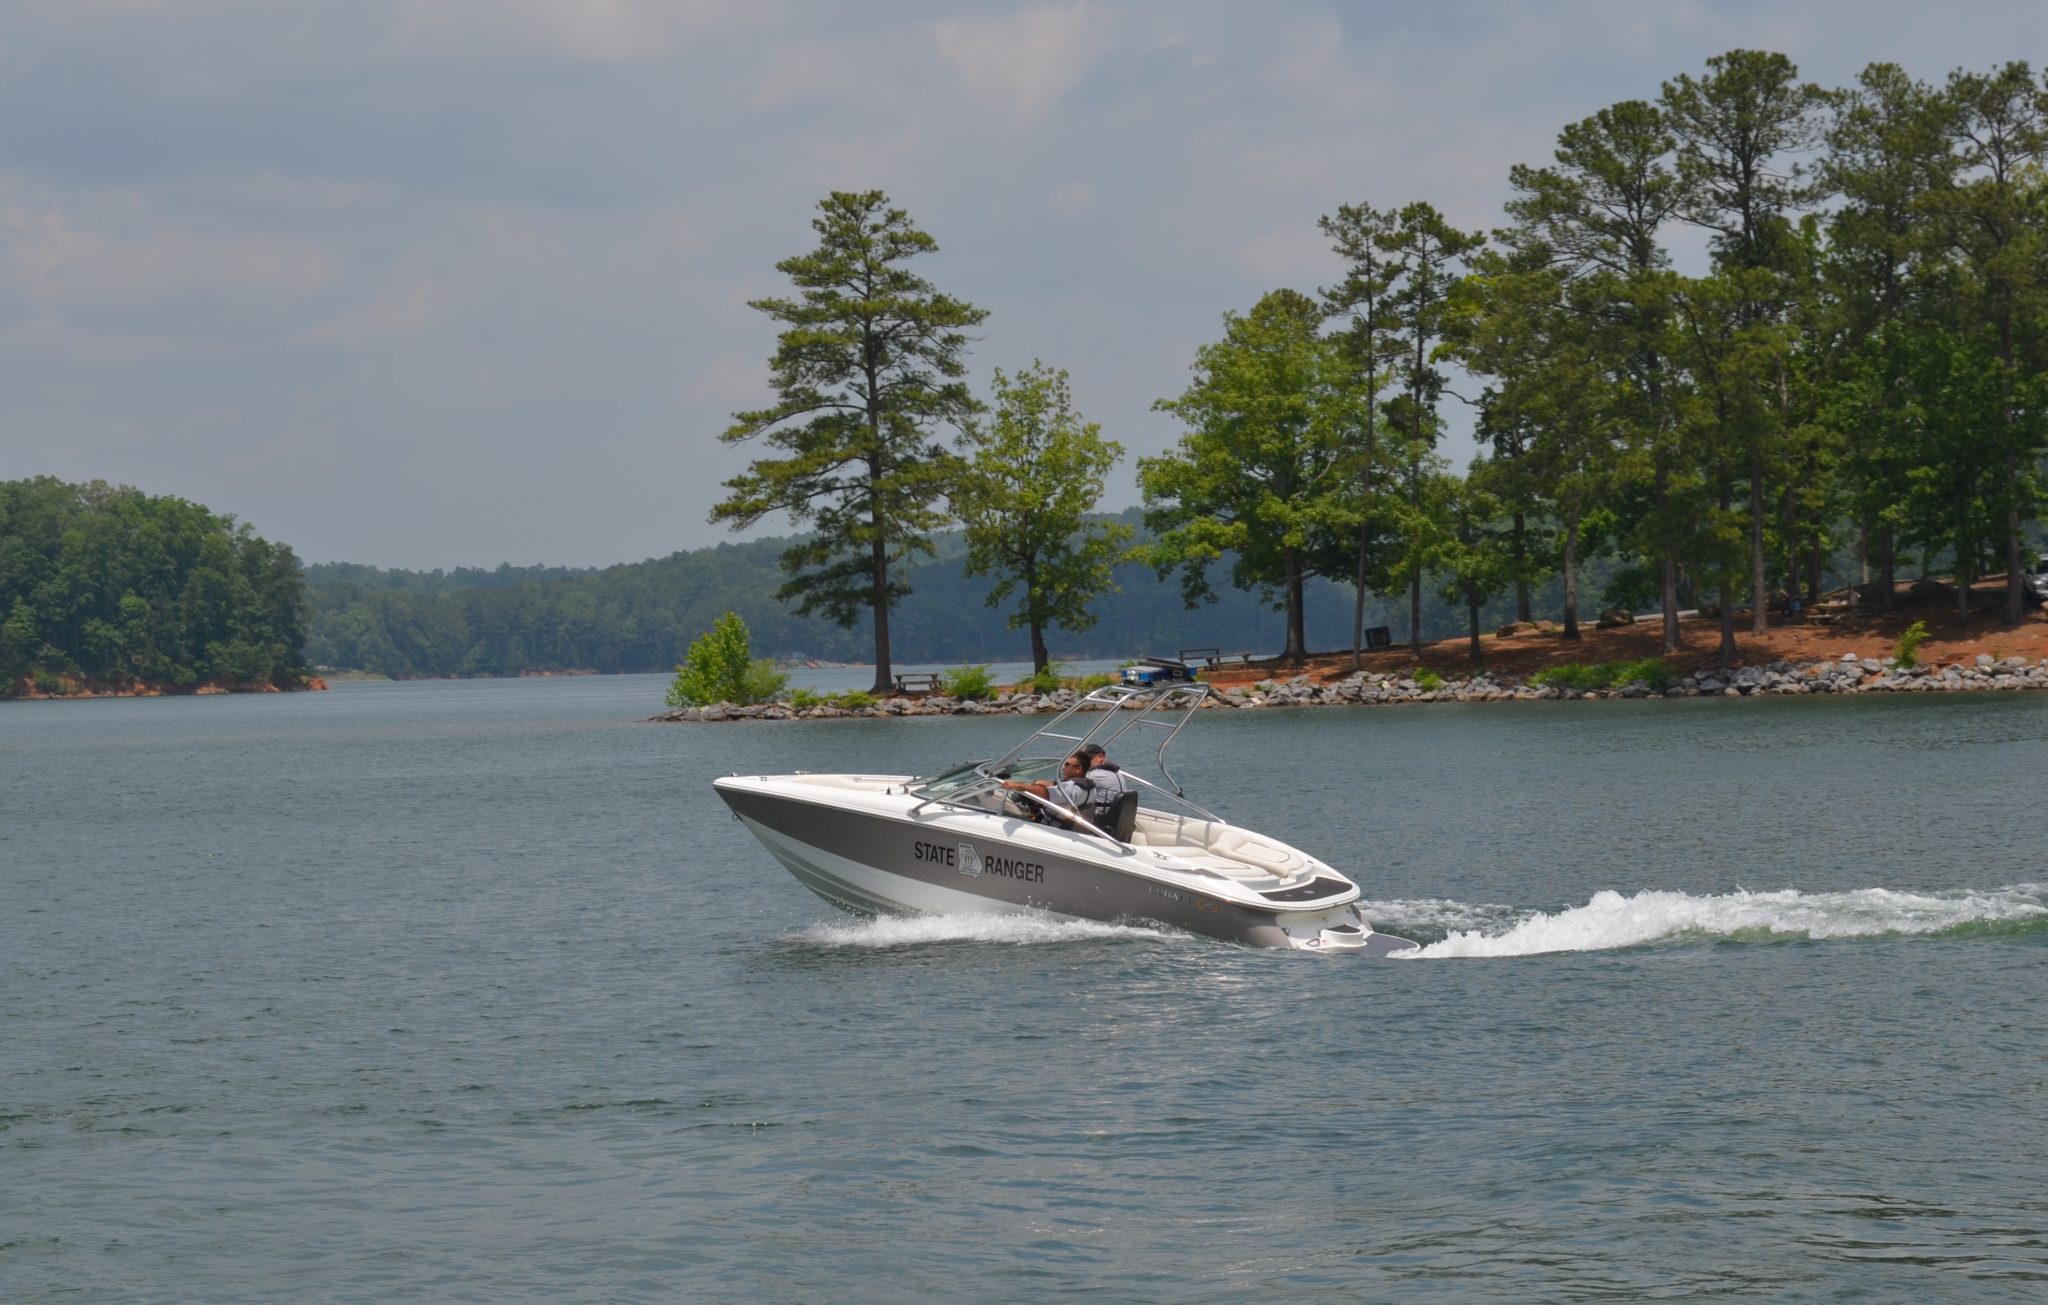 Tragic Boating Accident Claims Life of Cobb County Man on Lake Allatoona